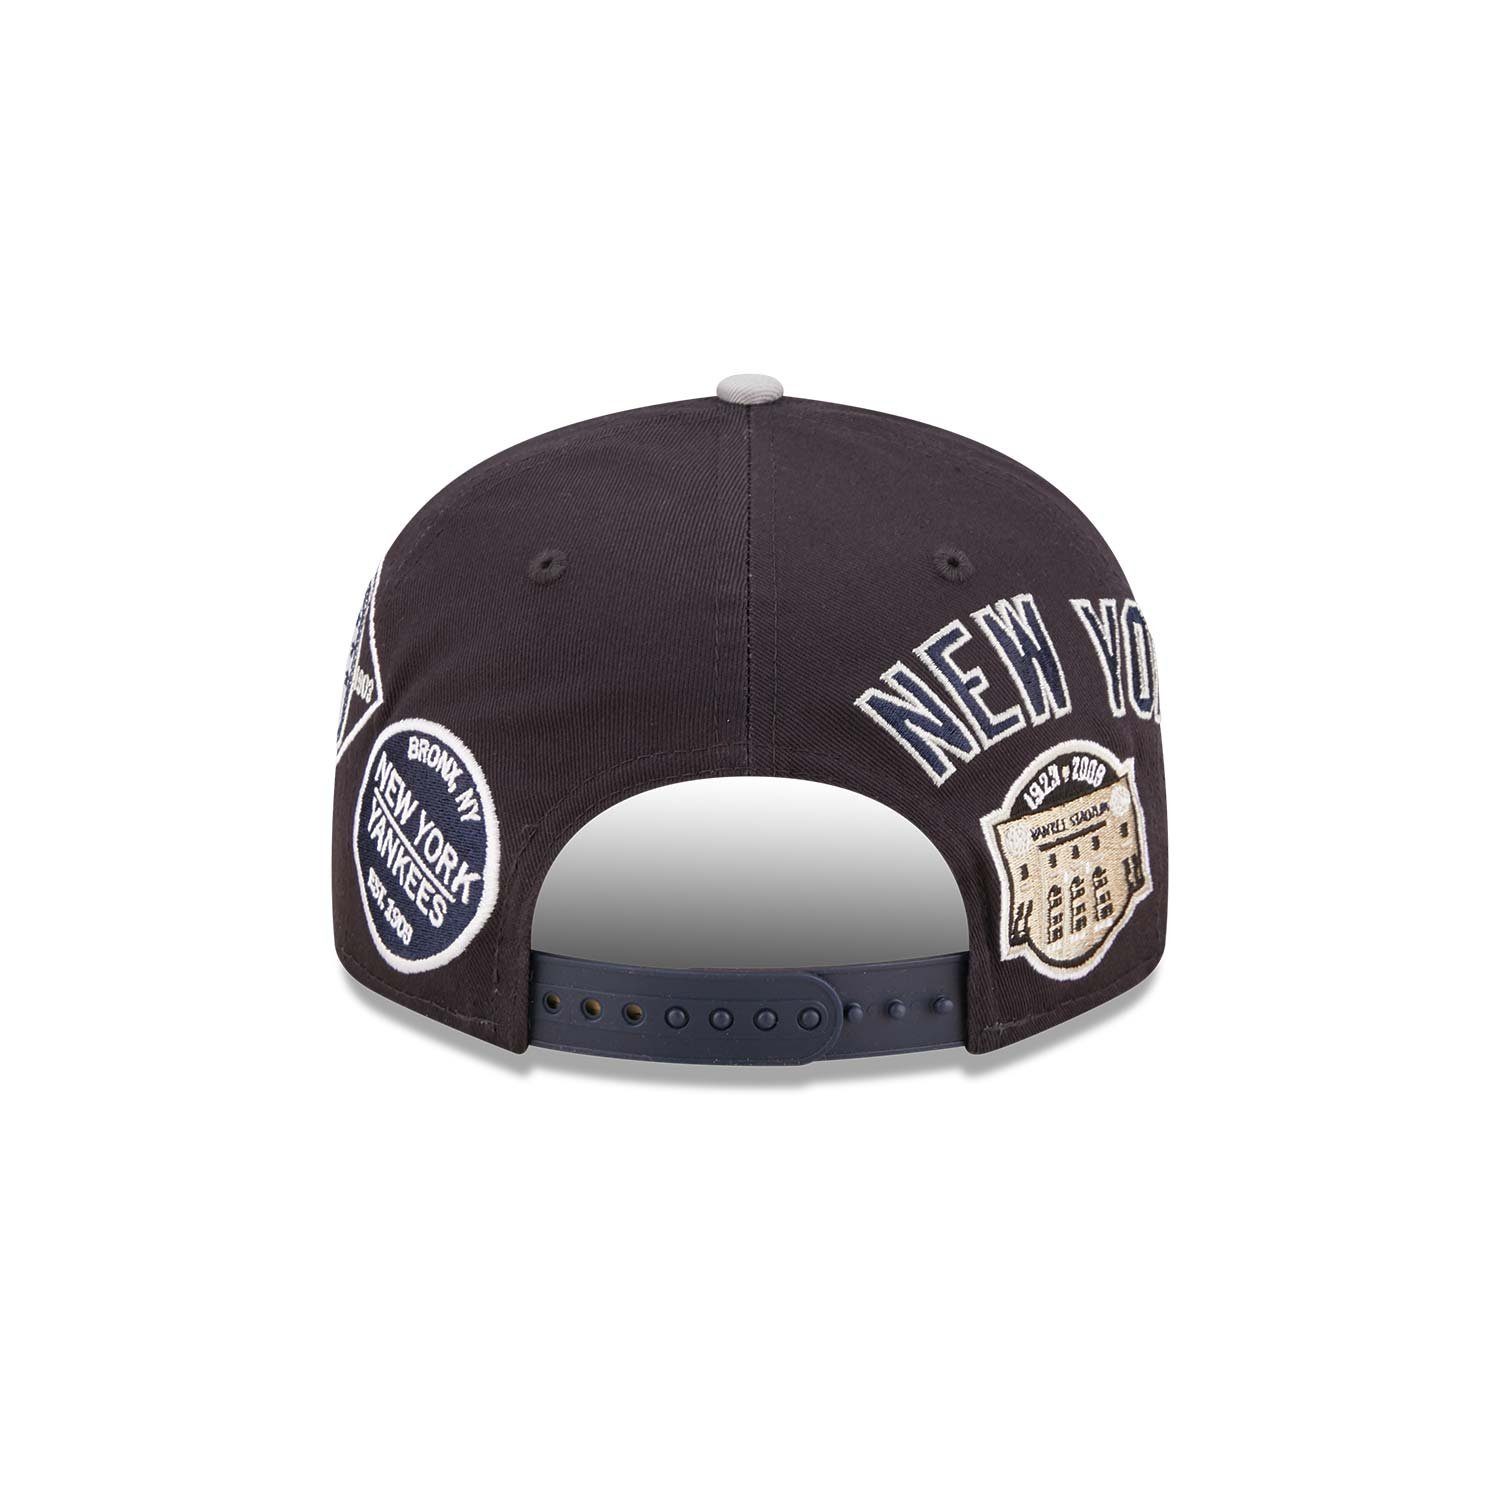 New Era Baseball 9FIFTY Over All York Cap New Patches Yankees